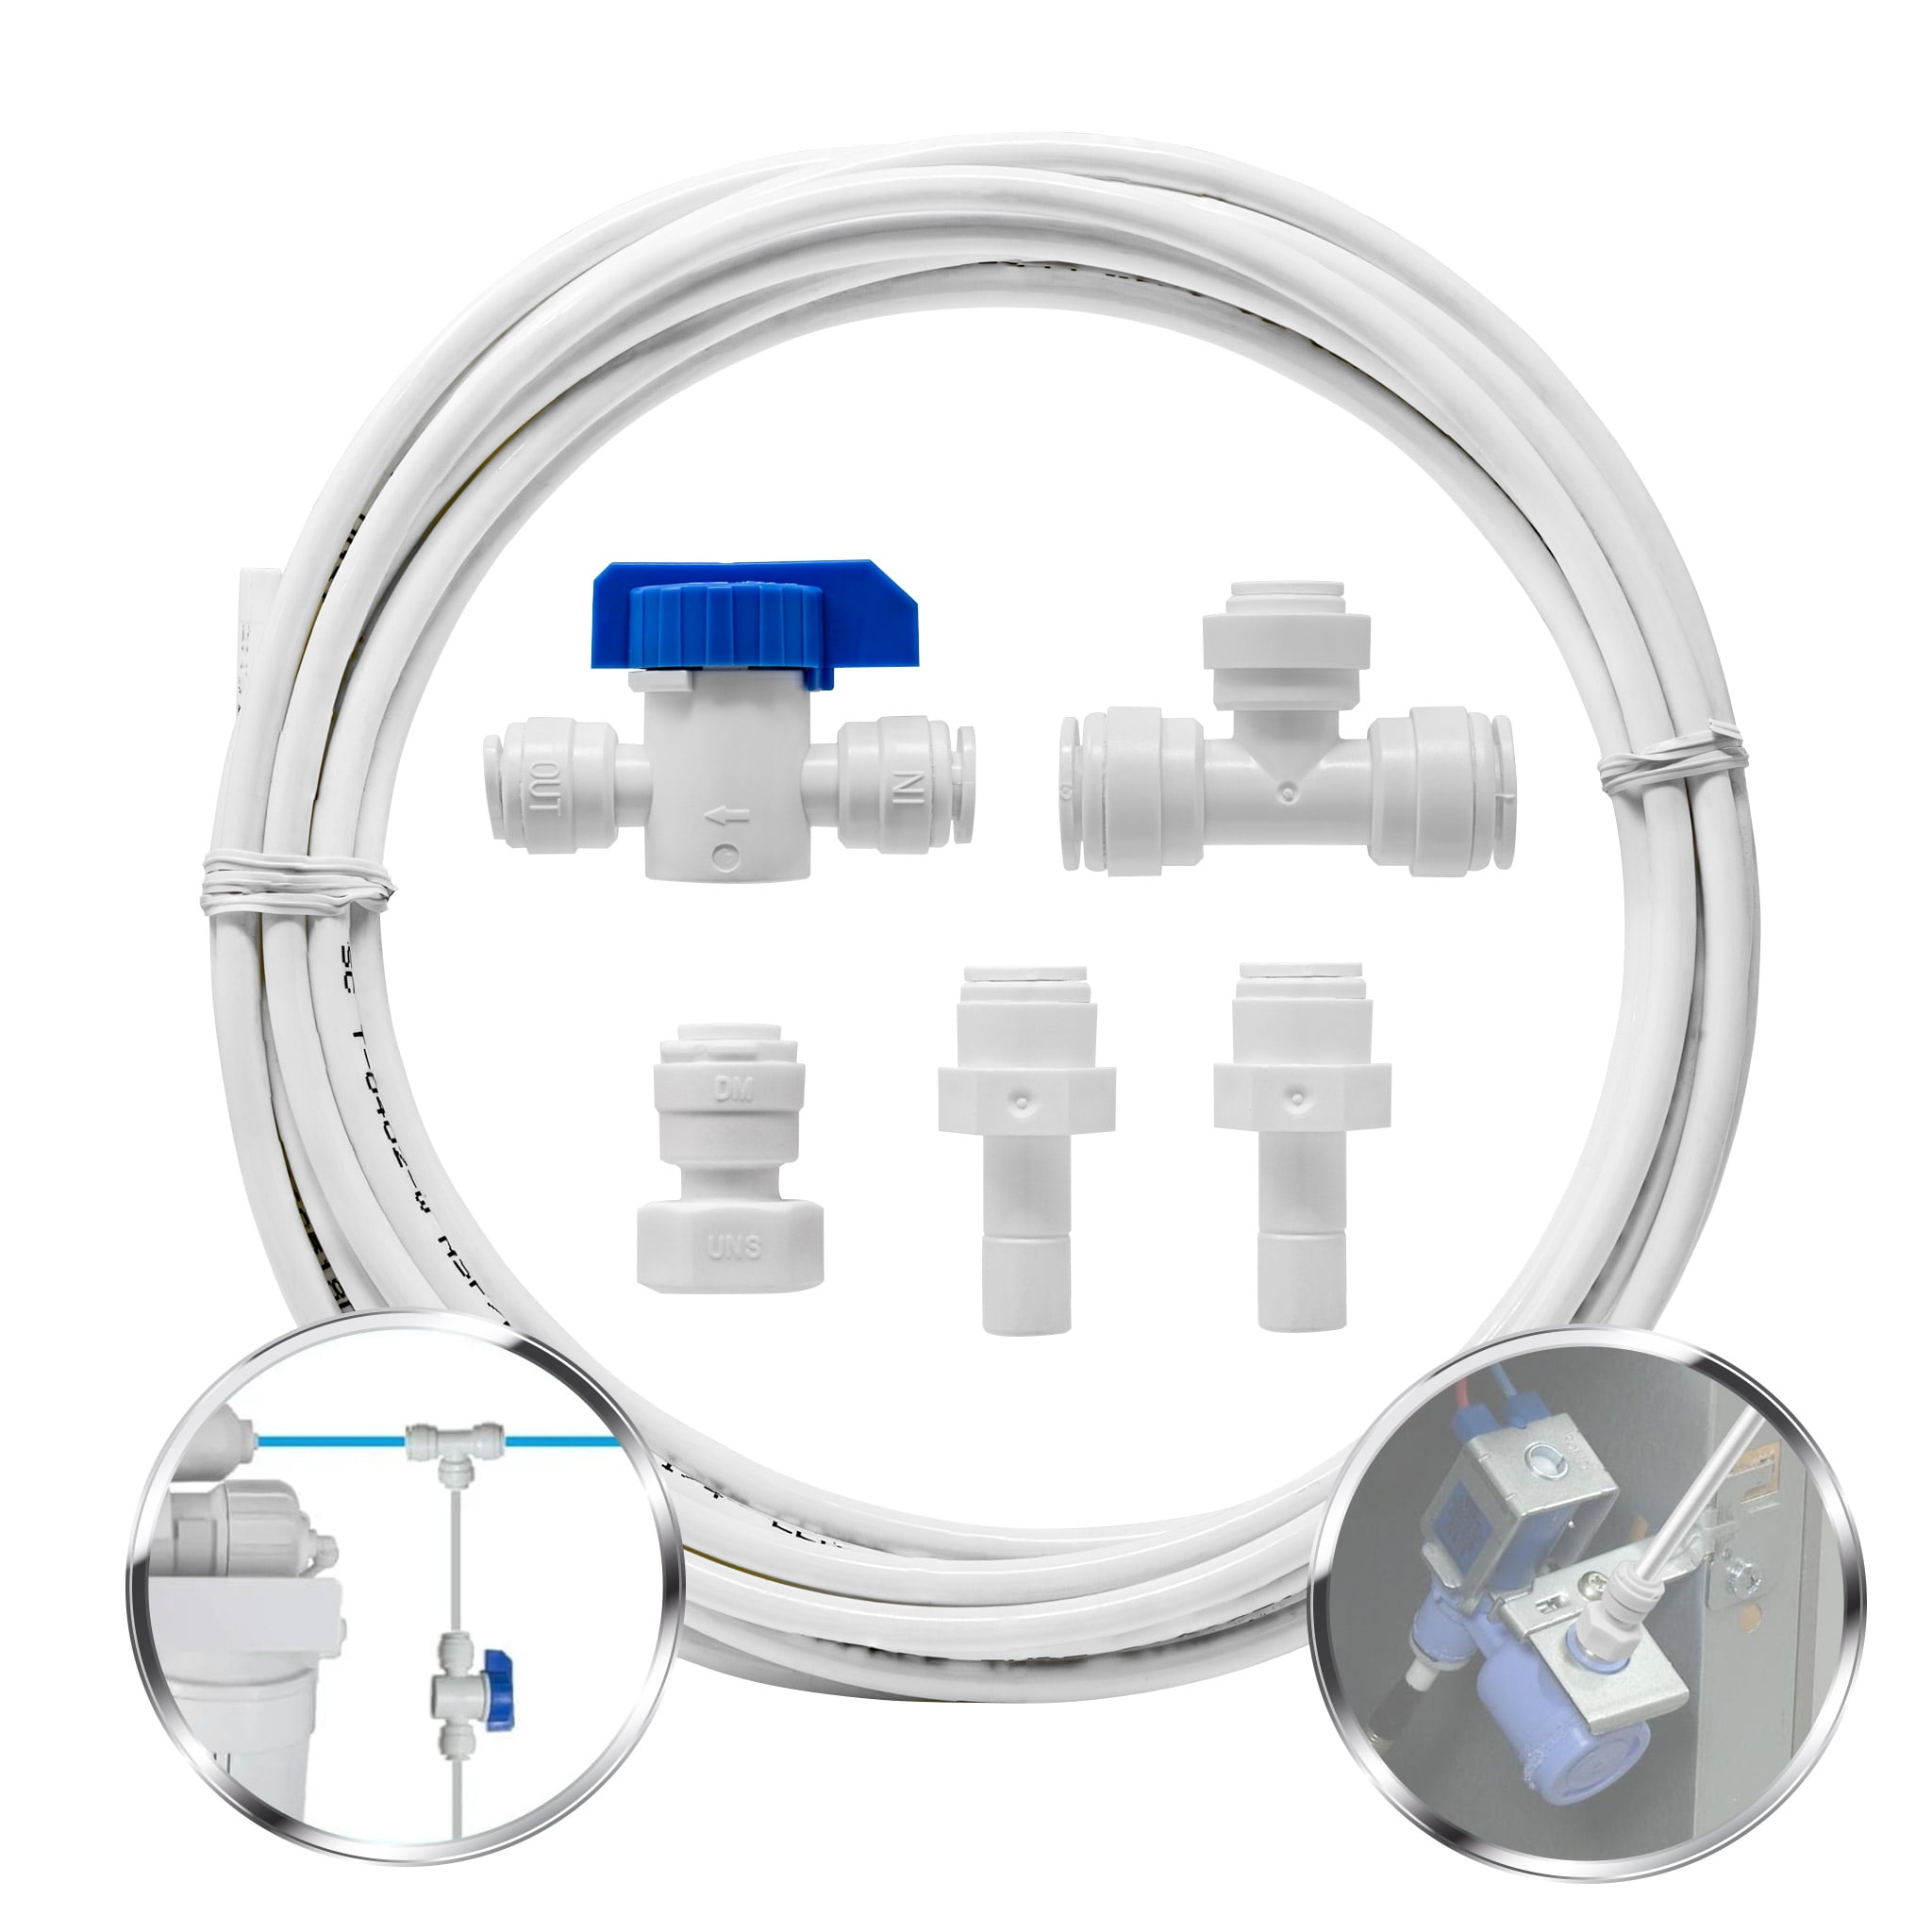 PURENAT iSH09-M607846mn Ice Maker Water Line Kit - Food Grade Refrigerator/Fridge  Water Tubing Installation Kit,1/4 In O.D. 25 FT Water Line with Quick